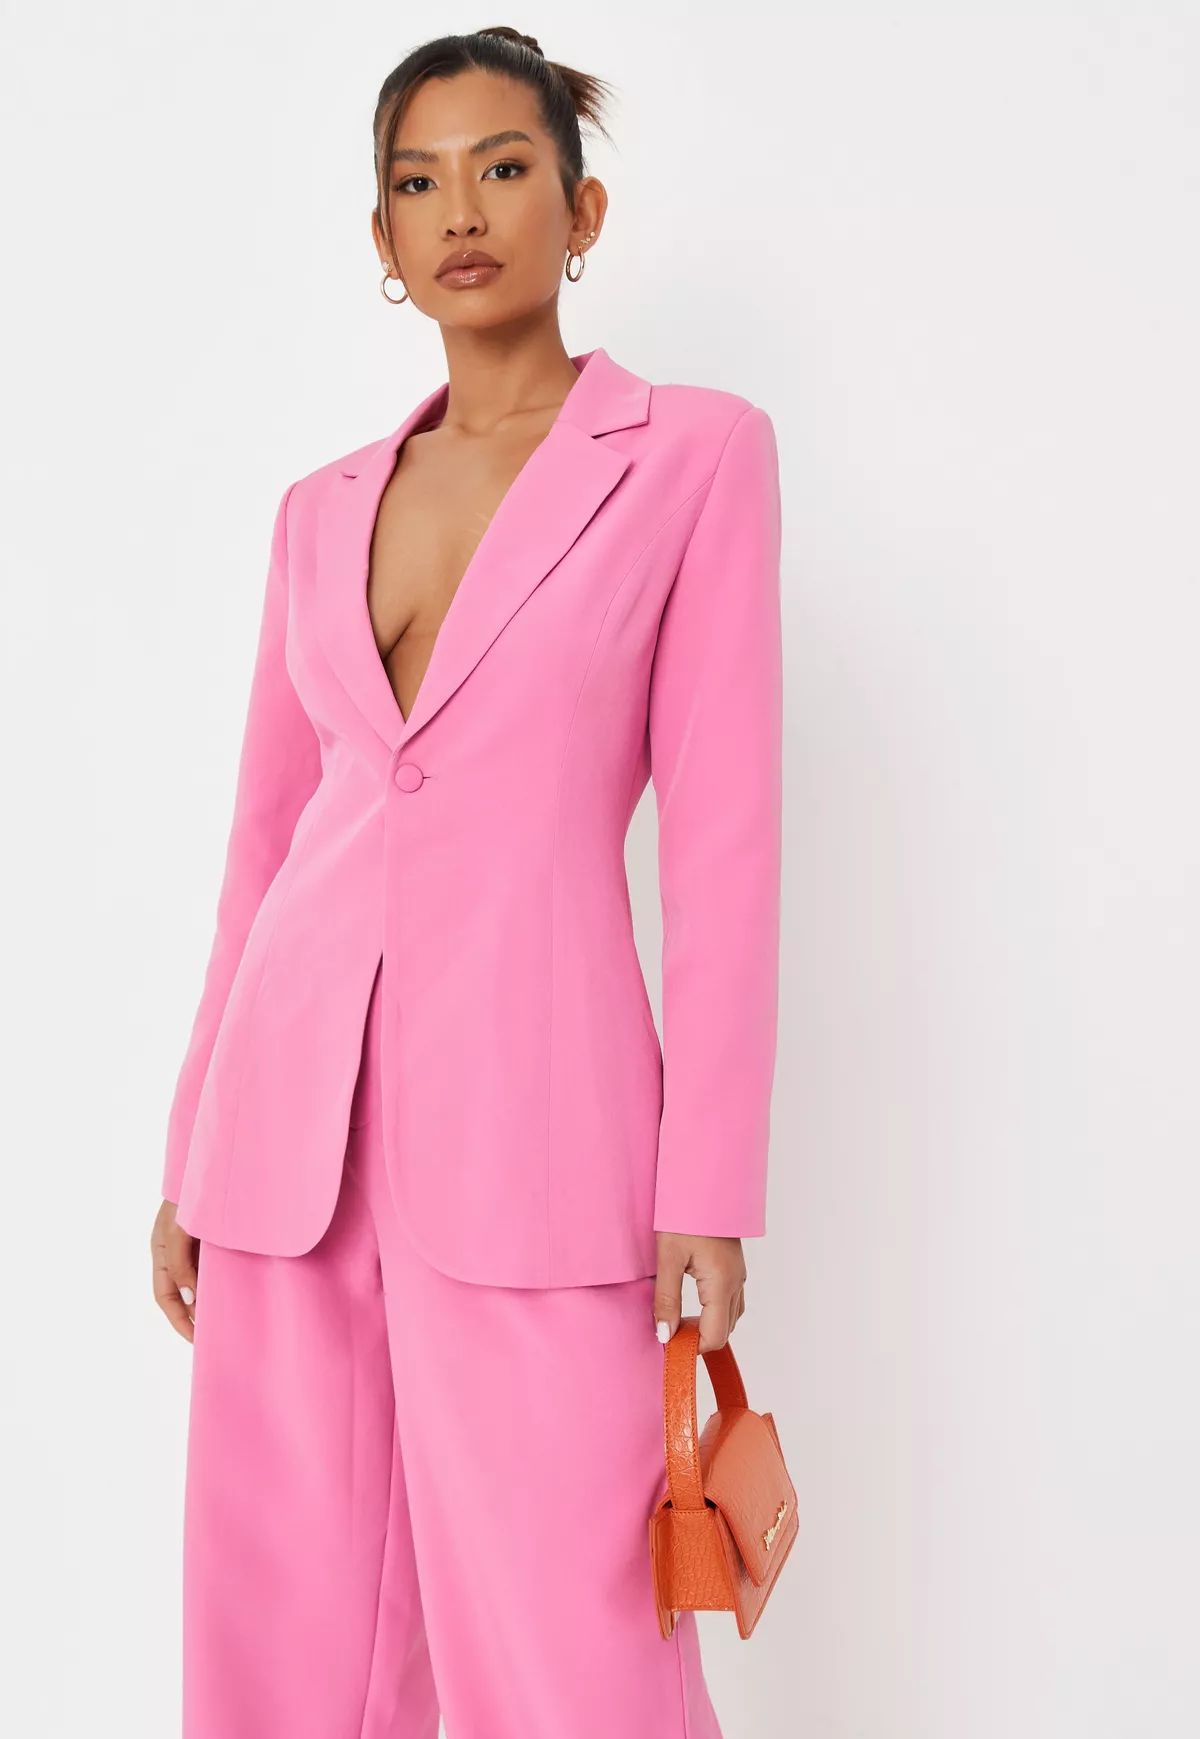 Missguided - Pink Slim Fit Tailored Blazer | Missguided (US & CA)